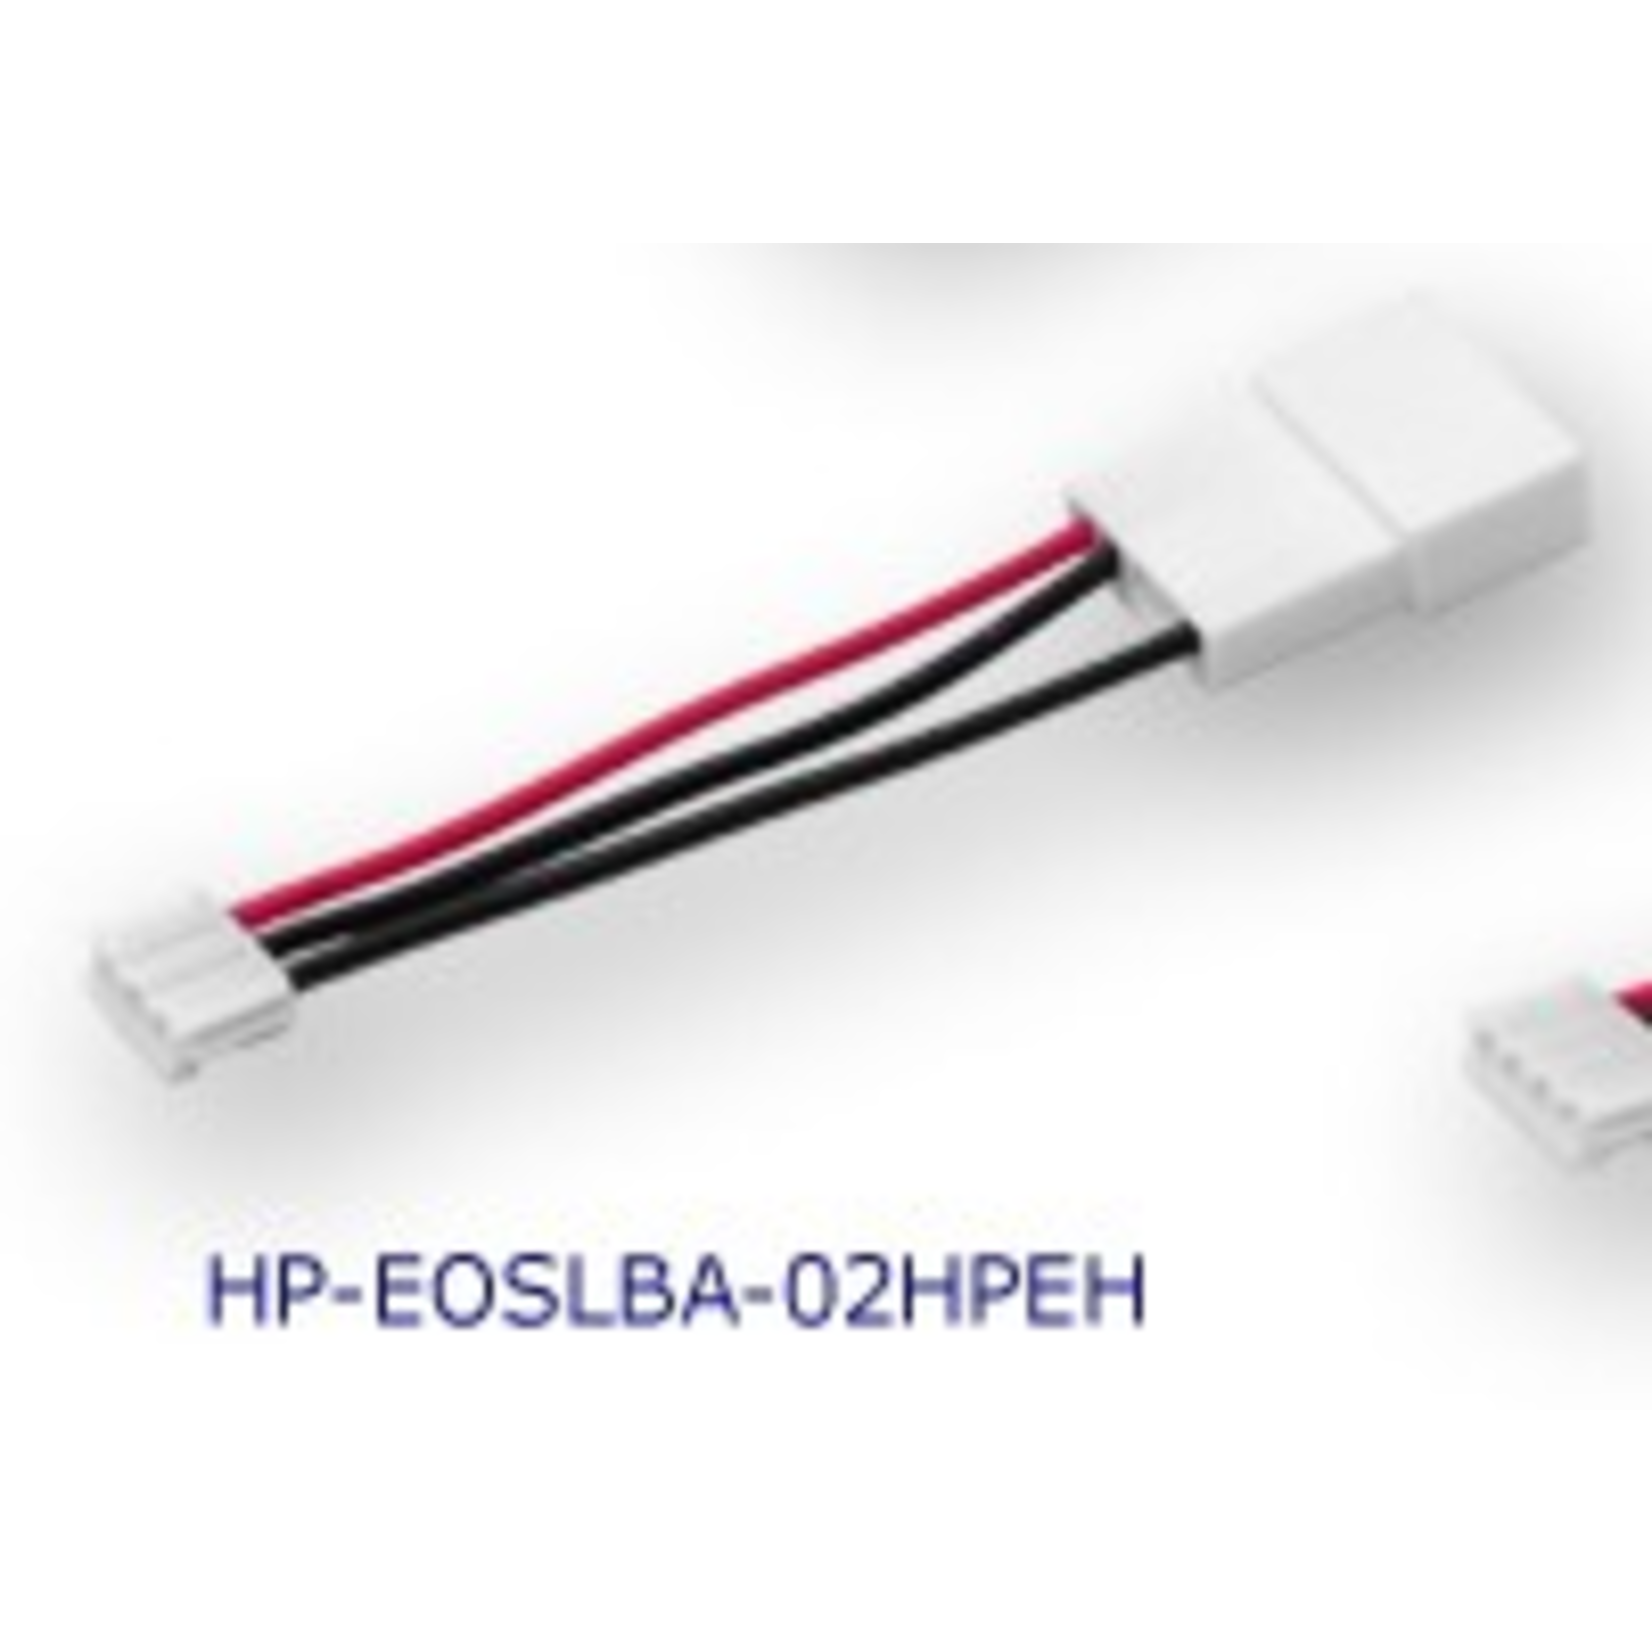 Hyperion Hyperion 2S Adapter for LiPo/LiFe to JST XH Chargers #HP-EOSLBA-02HPXH